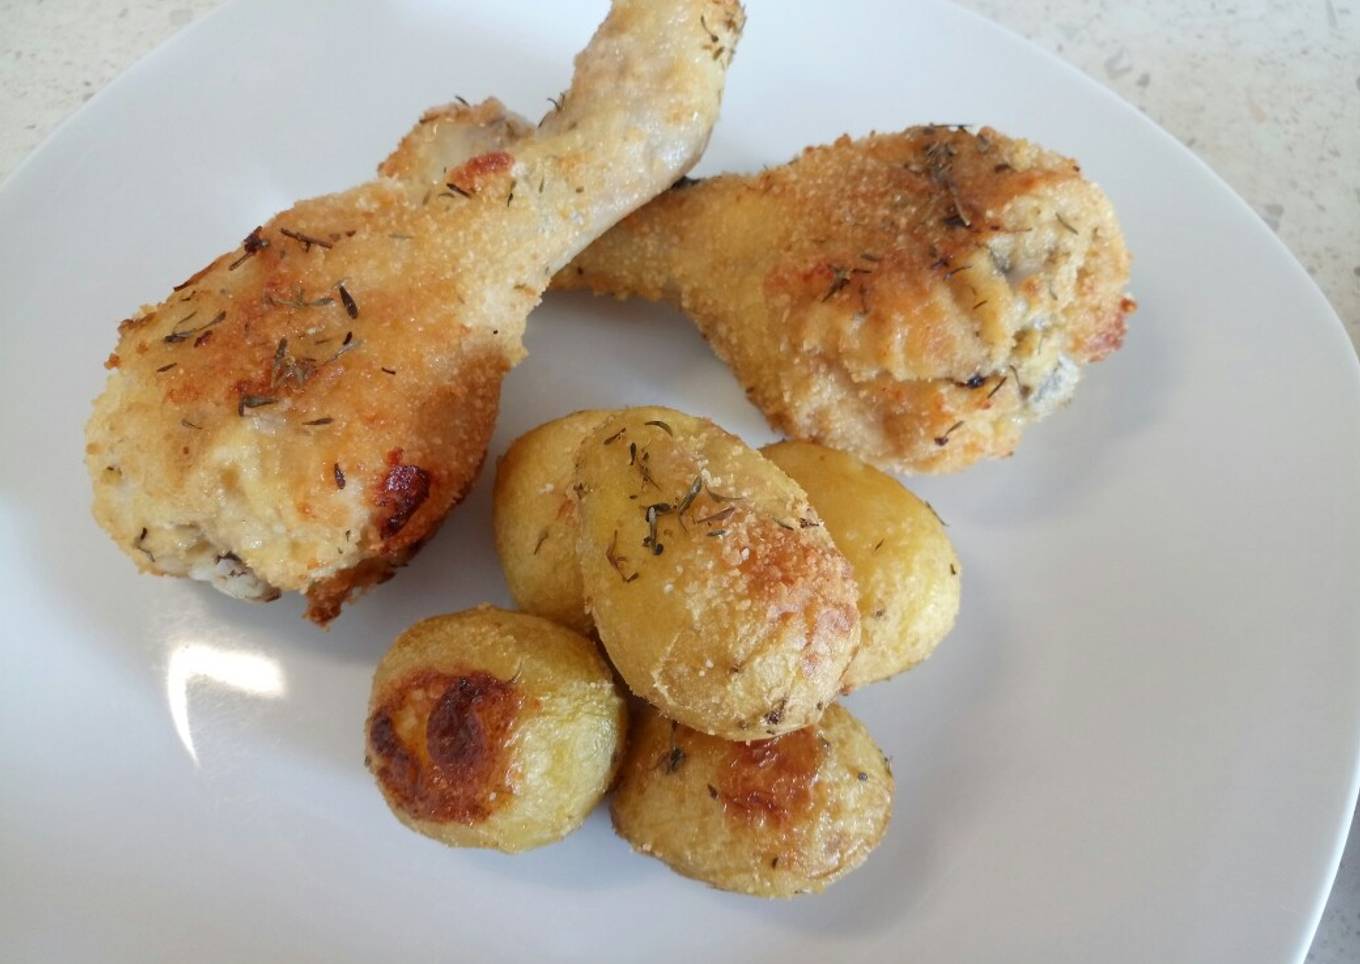 Thyme and Parmesan crusted chicken and new potatoes